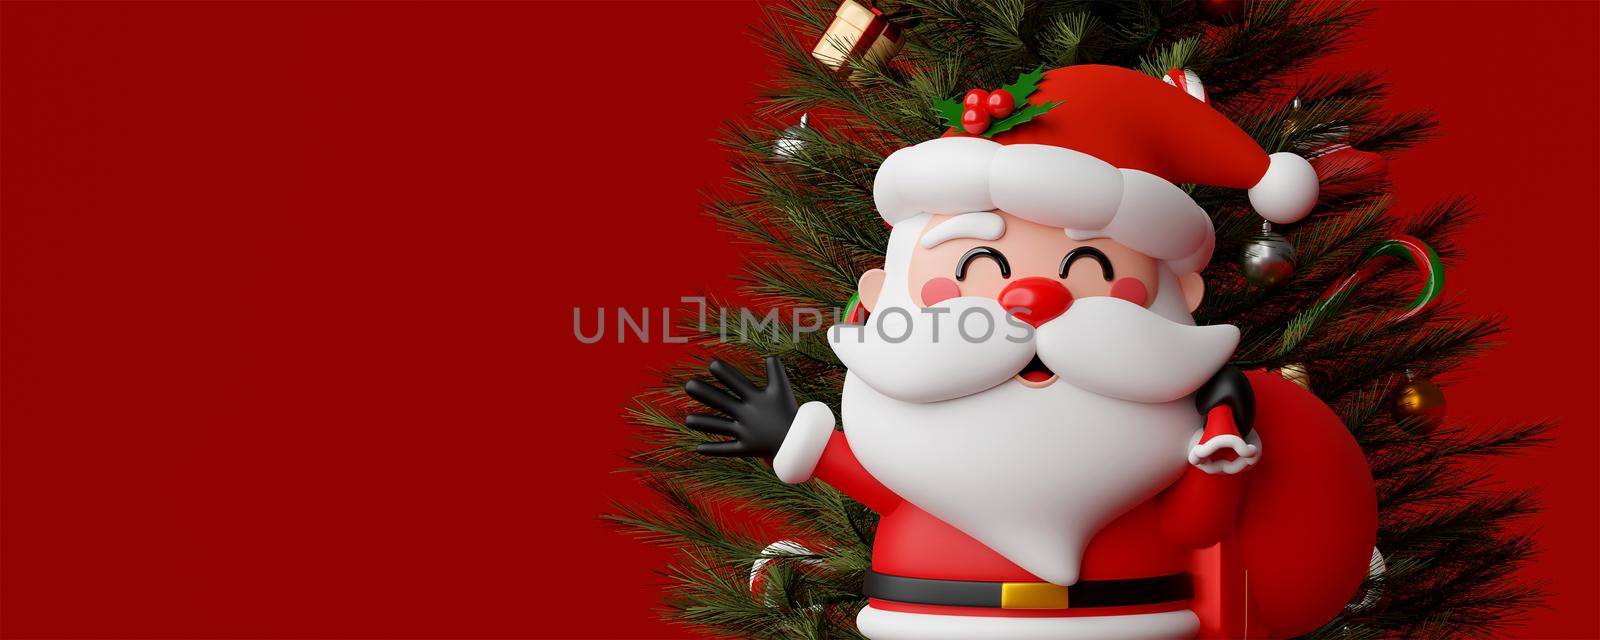 3d illustration Christmas banner of Santa Claus with Christmas tree by nutzchotwarut